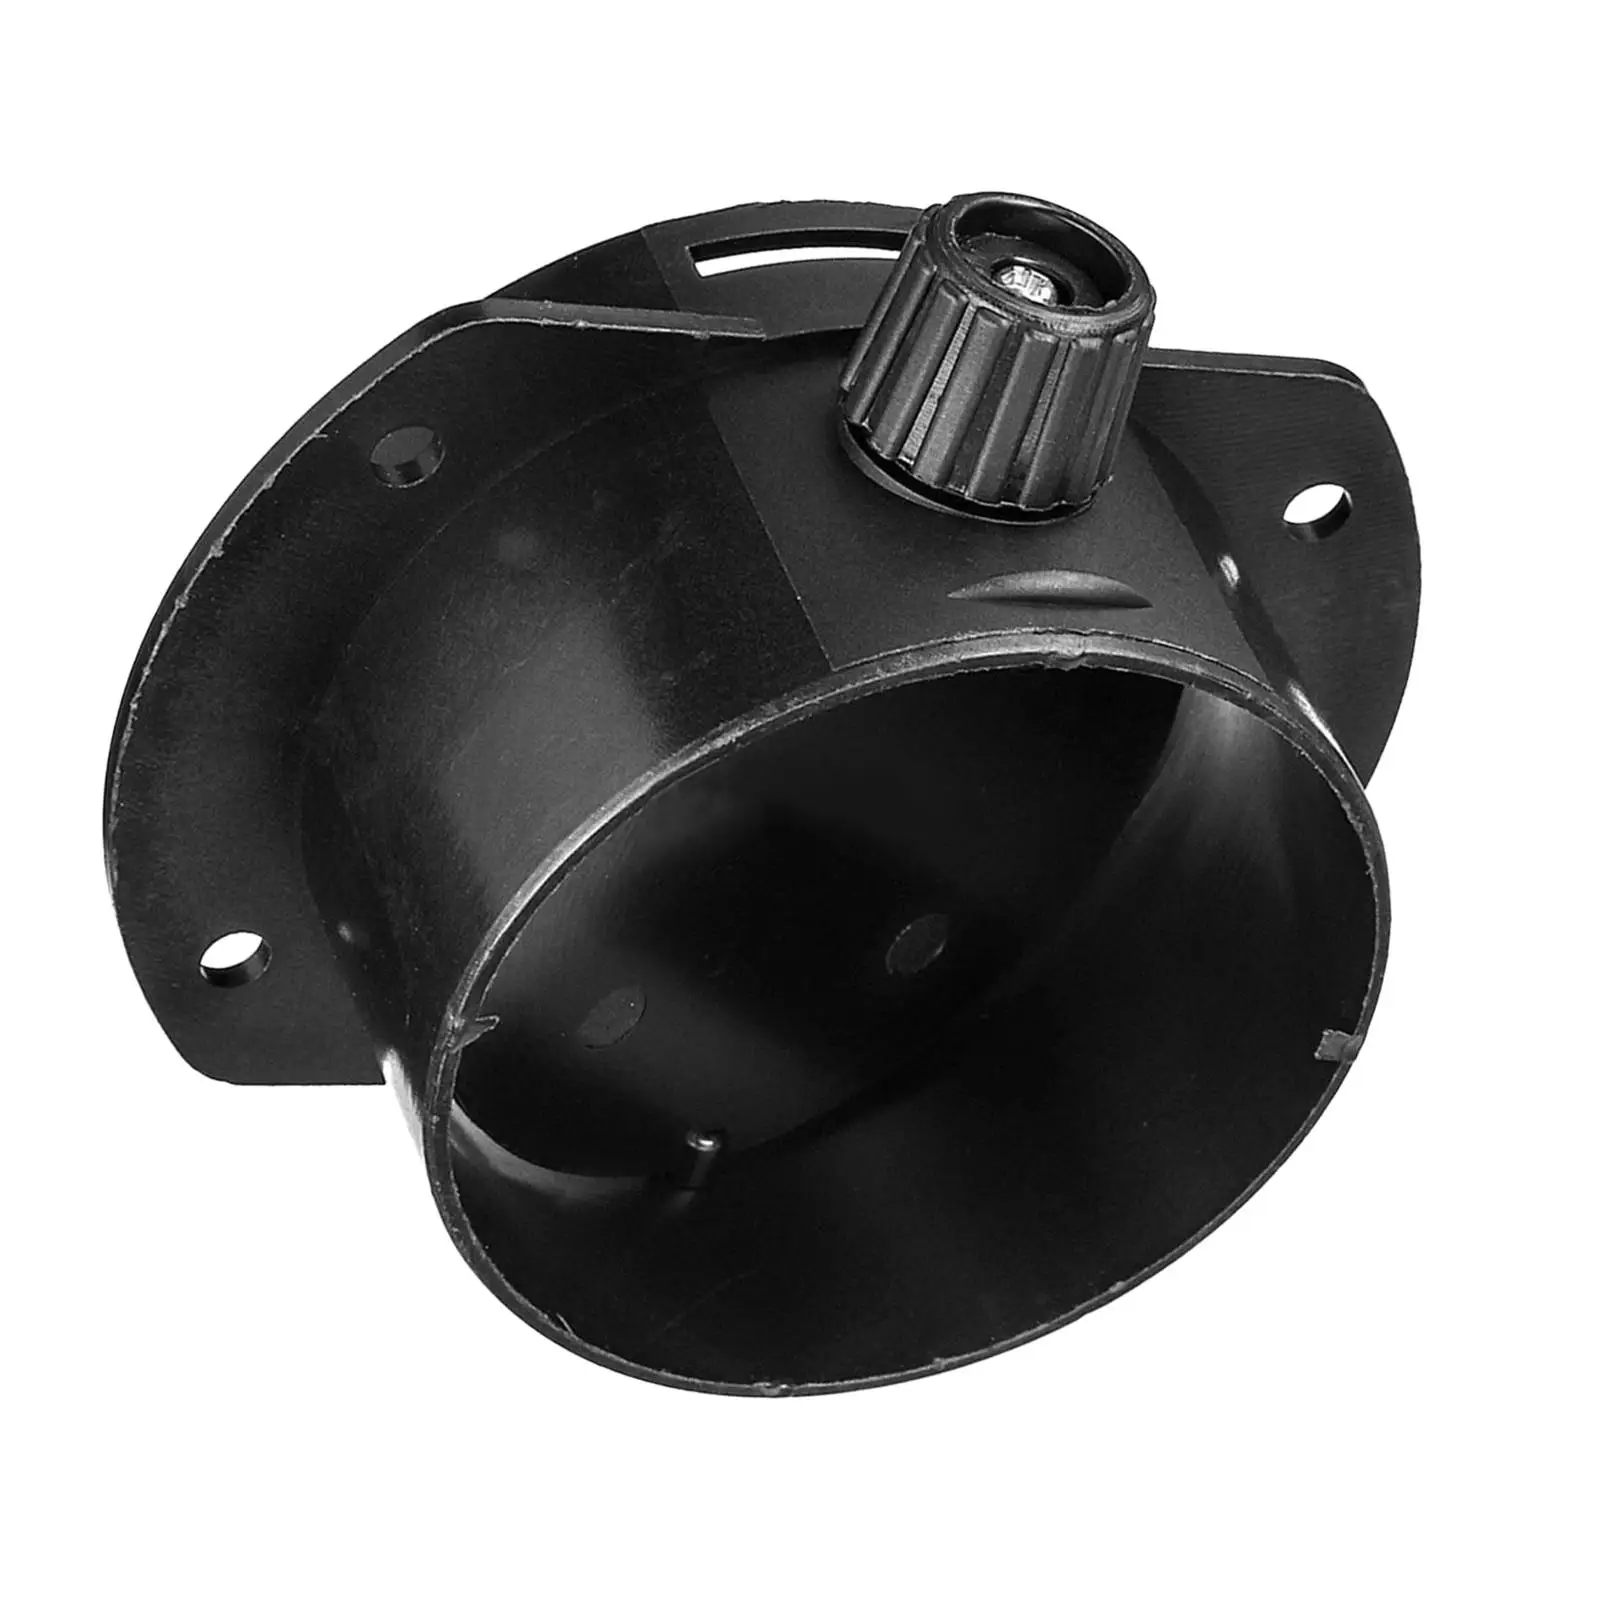 Auto Closeable Open Regulating Valve 60mm for 2kW Parking Heater Yacht